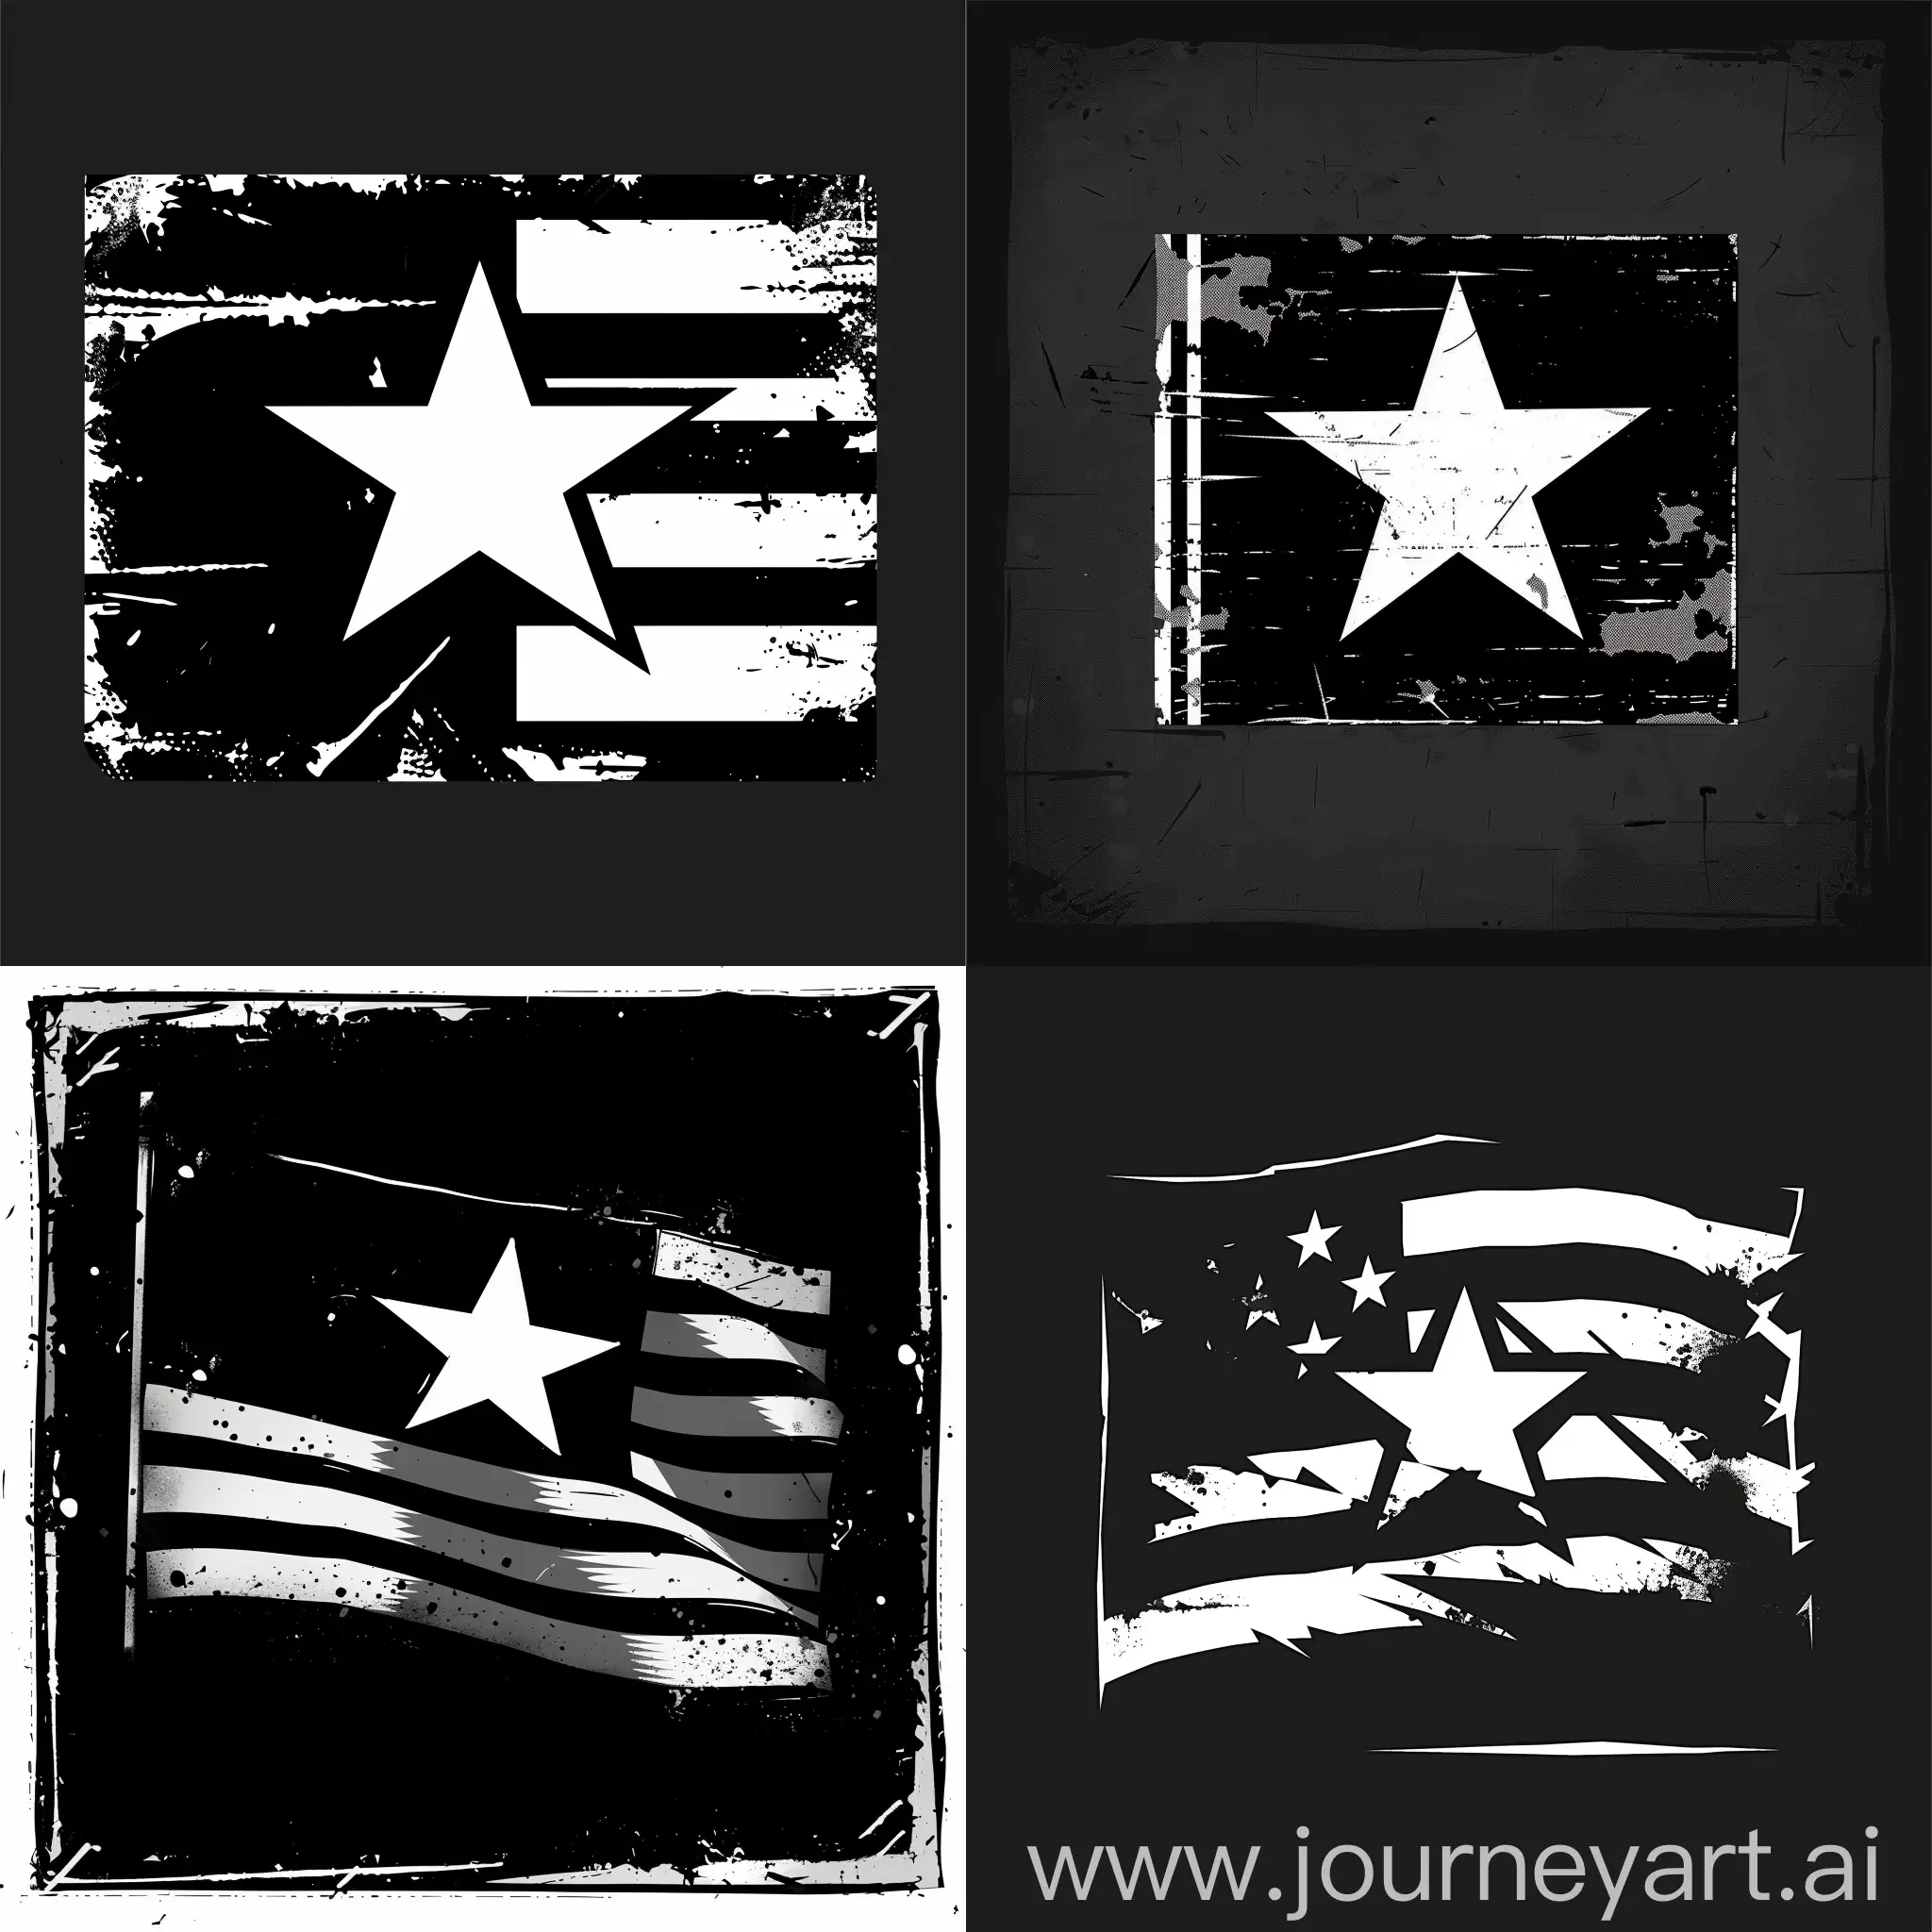 Draw a flag logo with a white star, the flag itself is black and the star on it is white. The logo should be in military style. And the logo itself is square